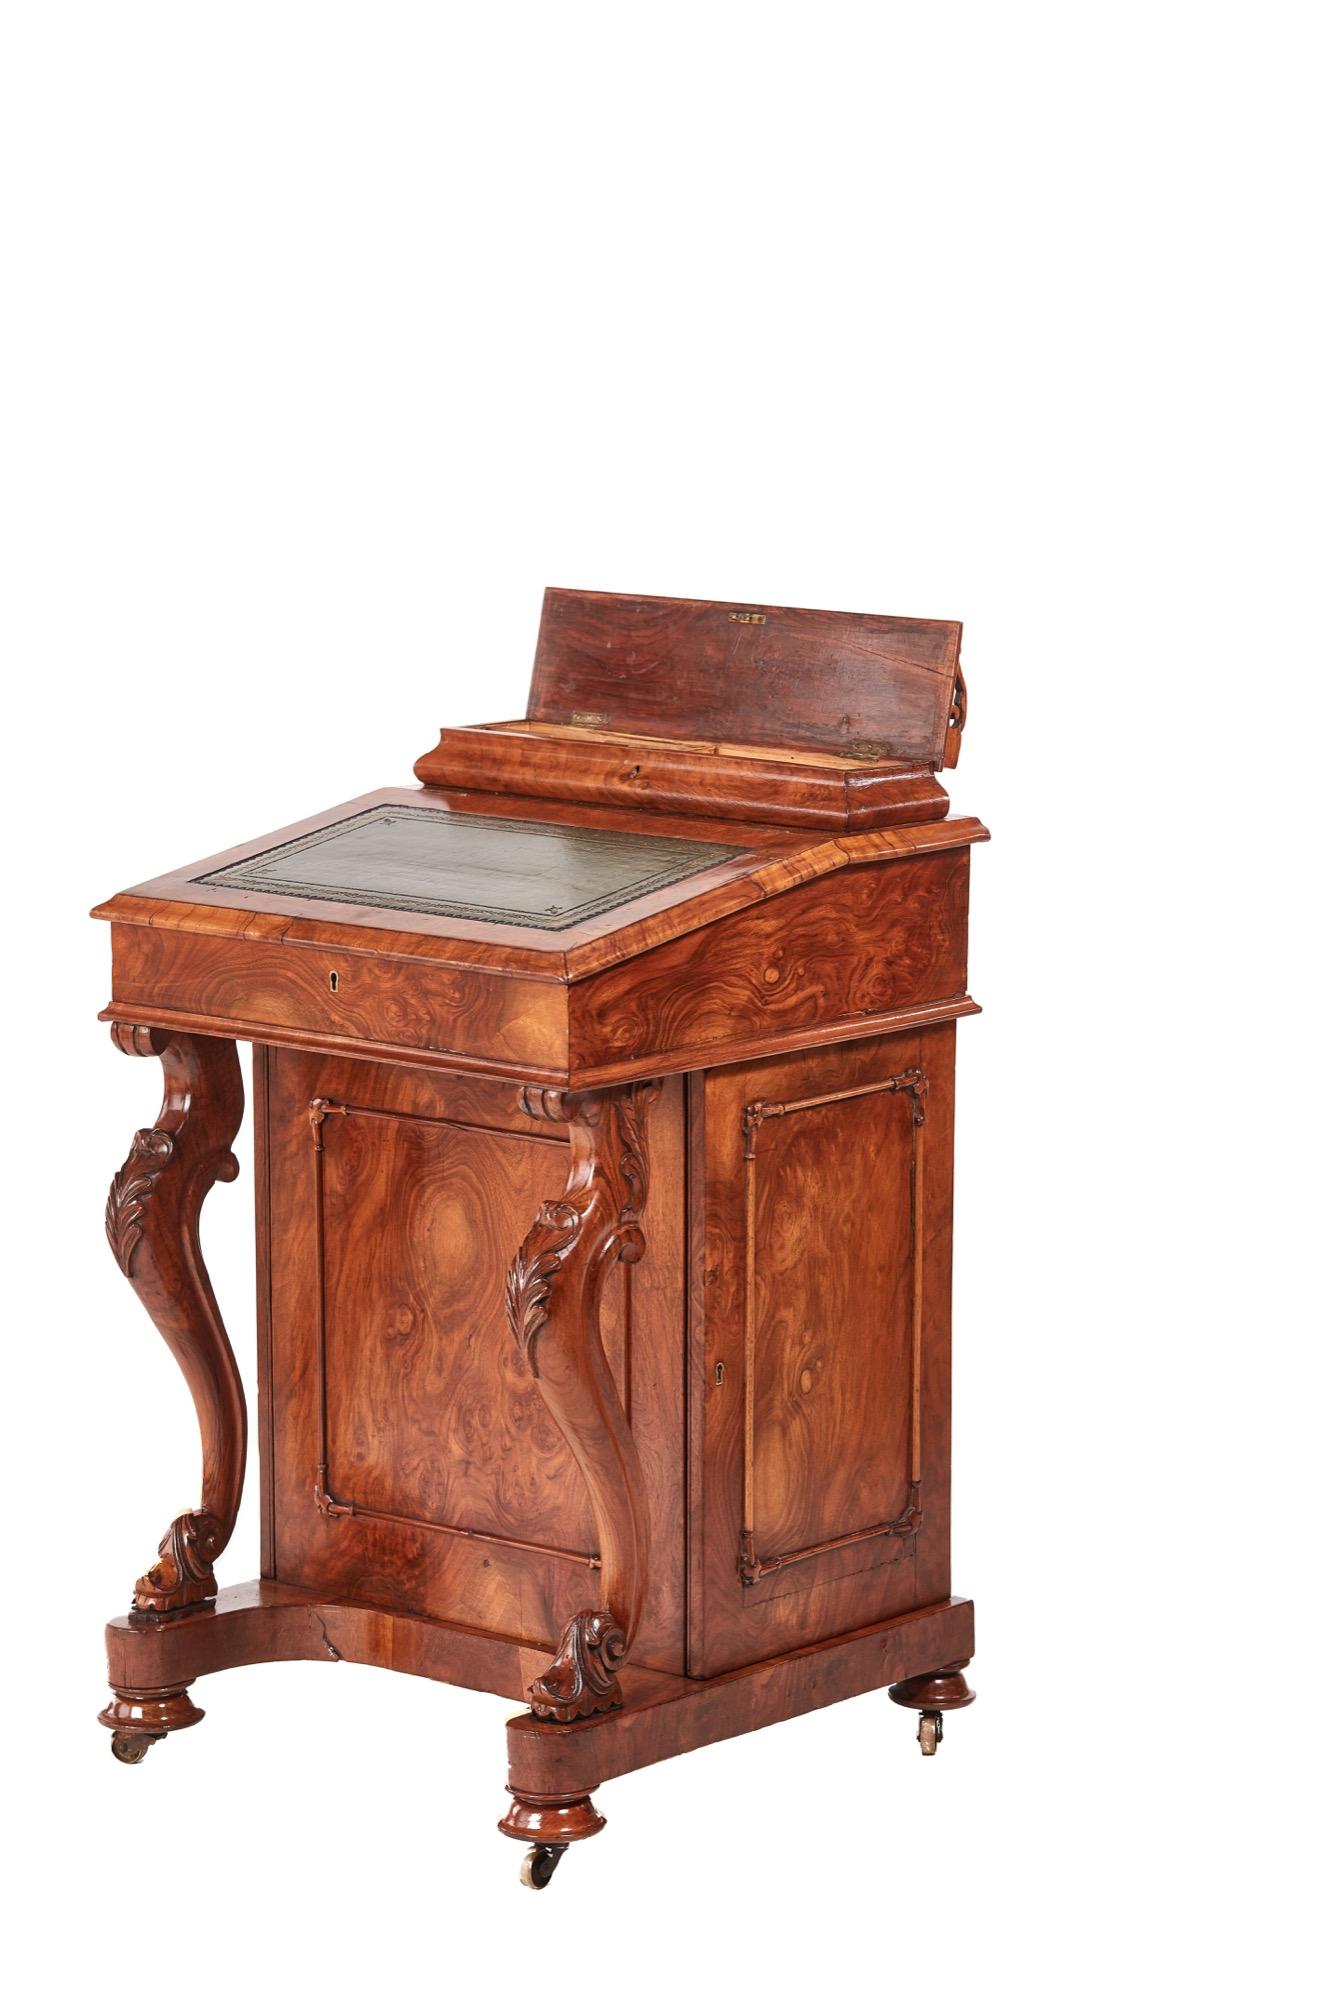 Victorian burr walnut freestanding Davenport, having a lift up lid and a writing slope both with fitted interiors, lovely burr walnut front panel, carved cabriole legs, walnut door to the right side opens to reveal four drawers, dummy door to the